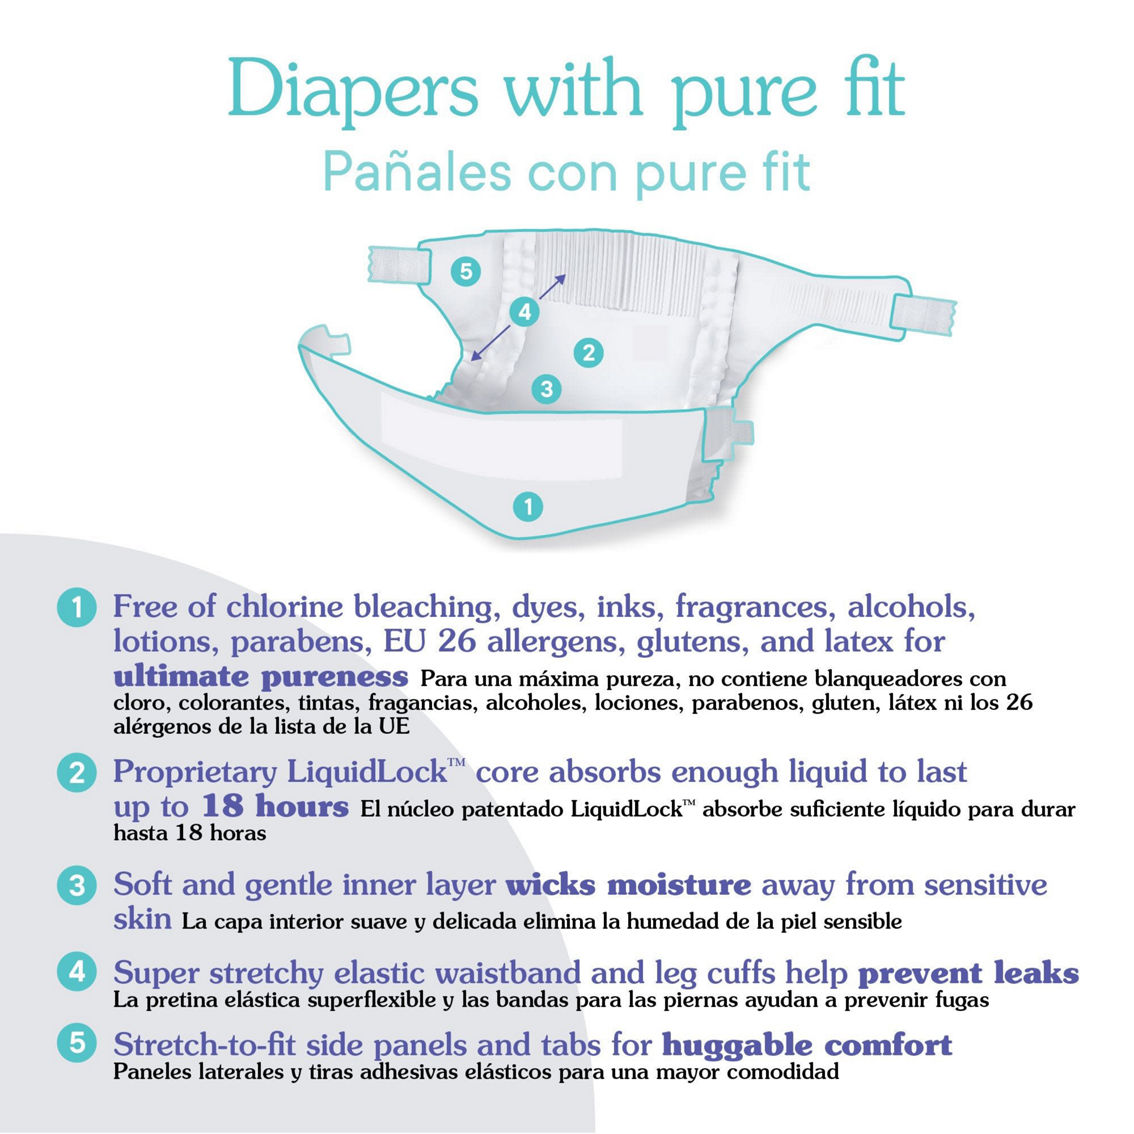 PurePail Disposable Diapers with Pure Fit - Image 2 of 5